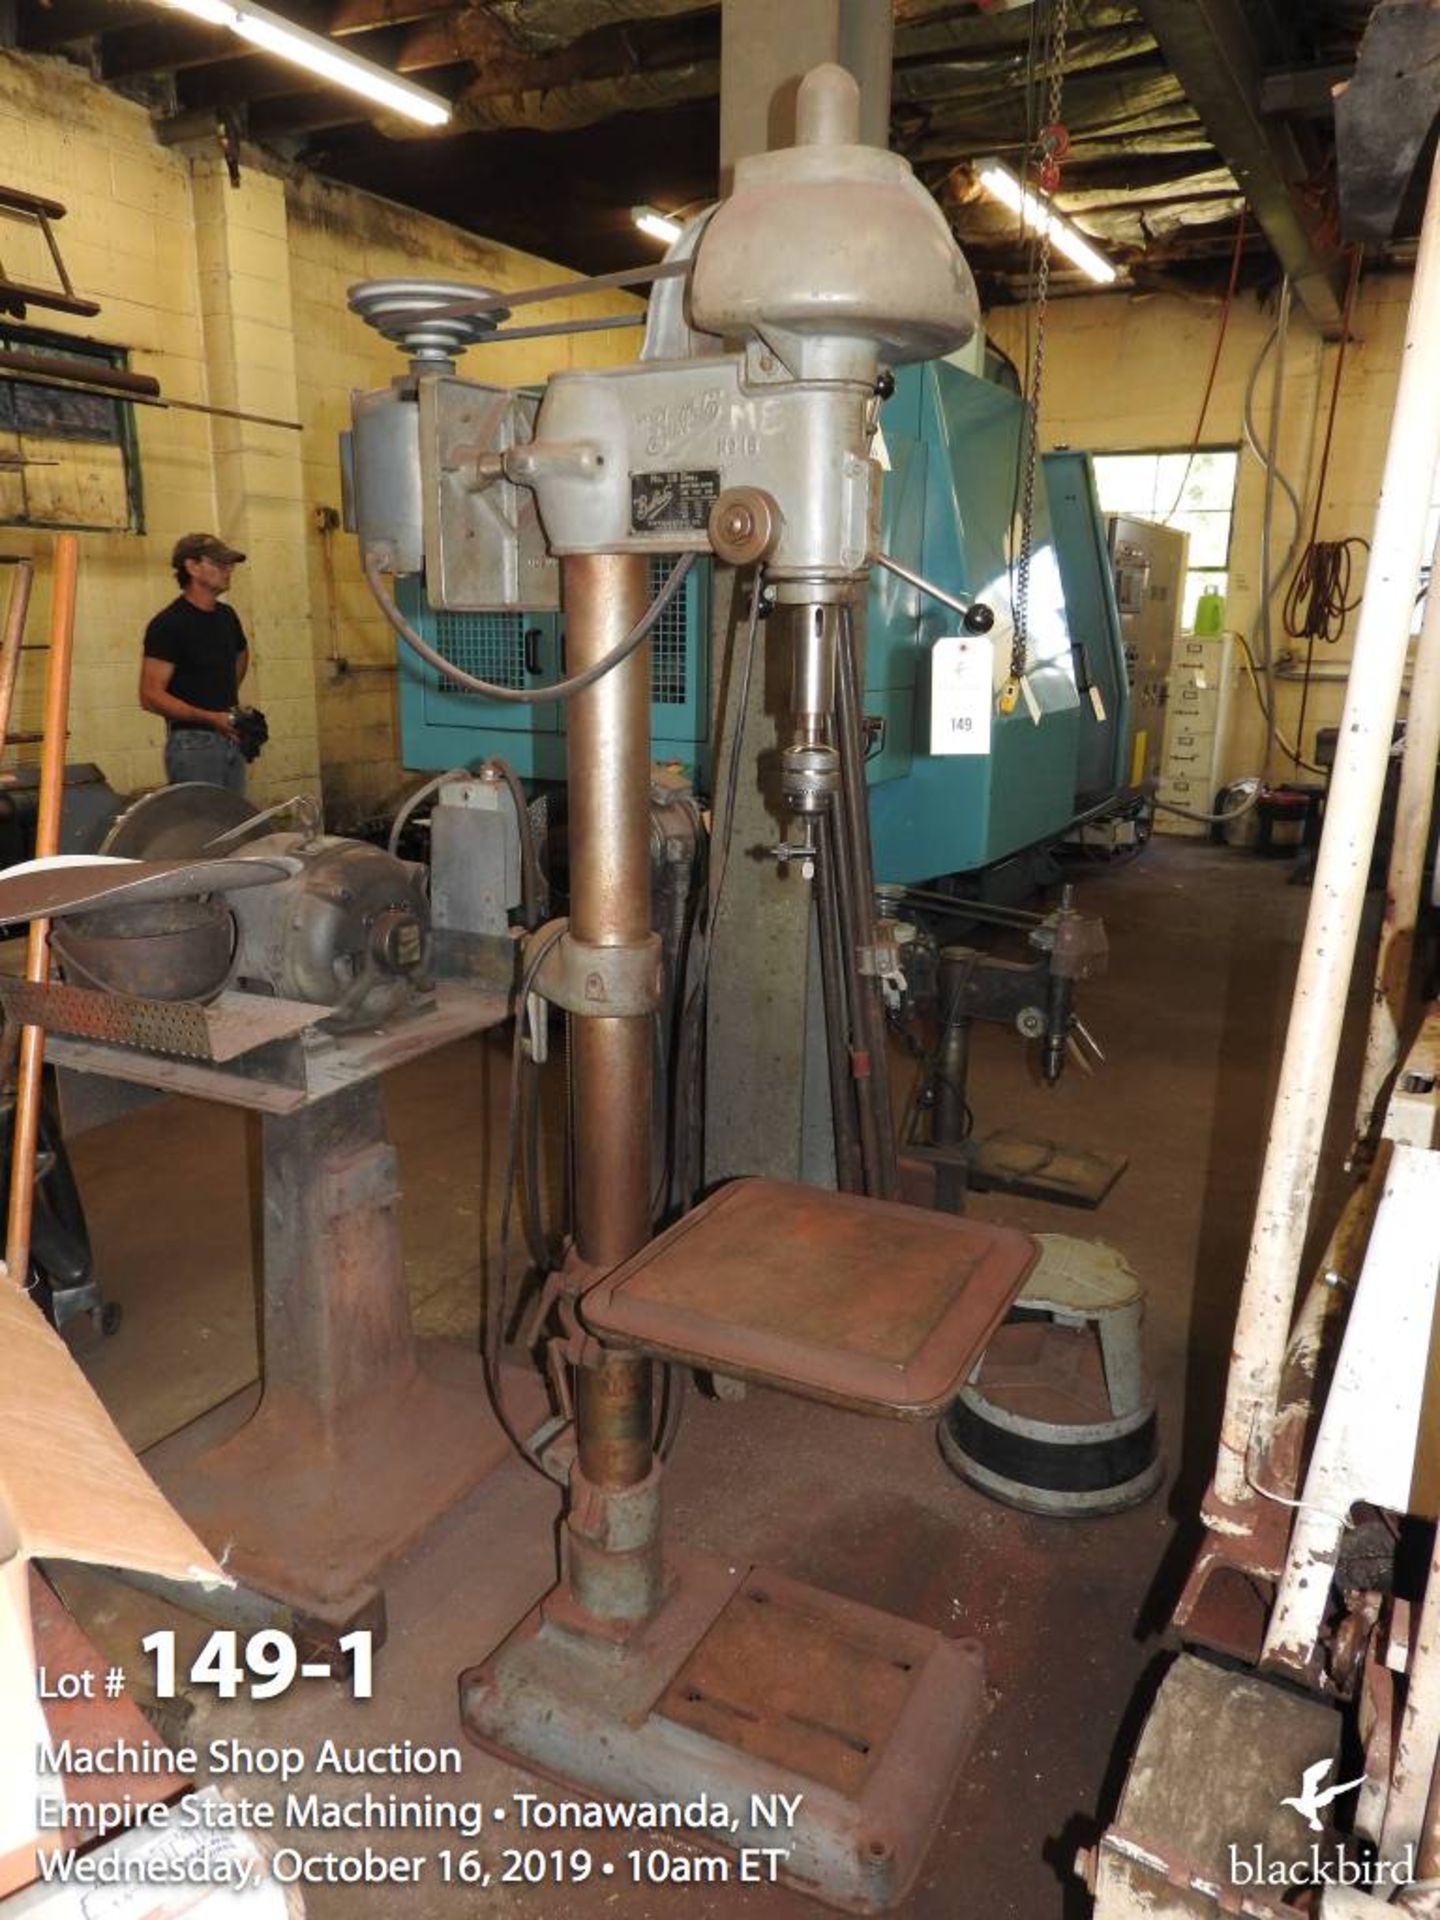 Buffalo Forge #18 floor drill press with 14" x 14" table, 120V